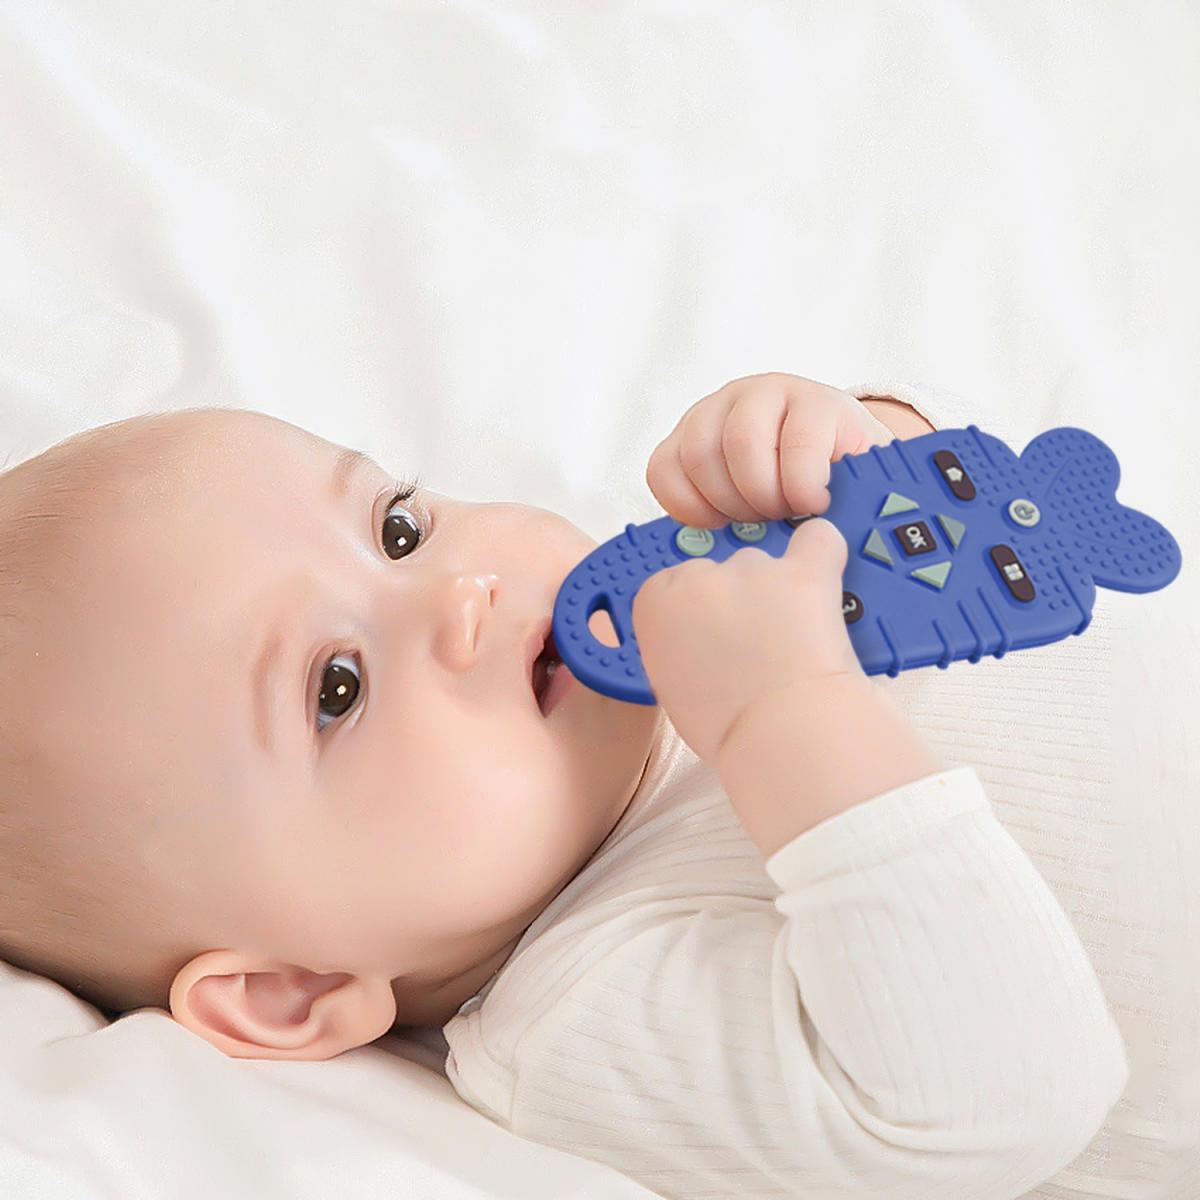 Baby remote control teether baby anti-eating hand molar stick toy bite gum simulation TV random color teether